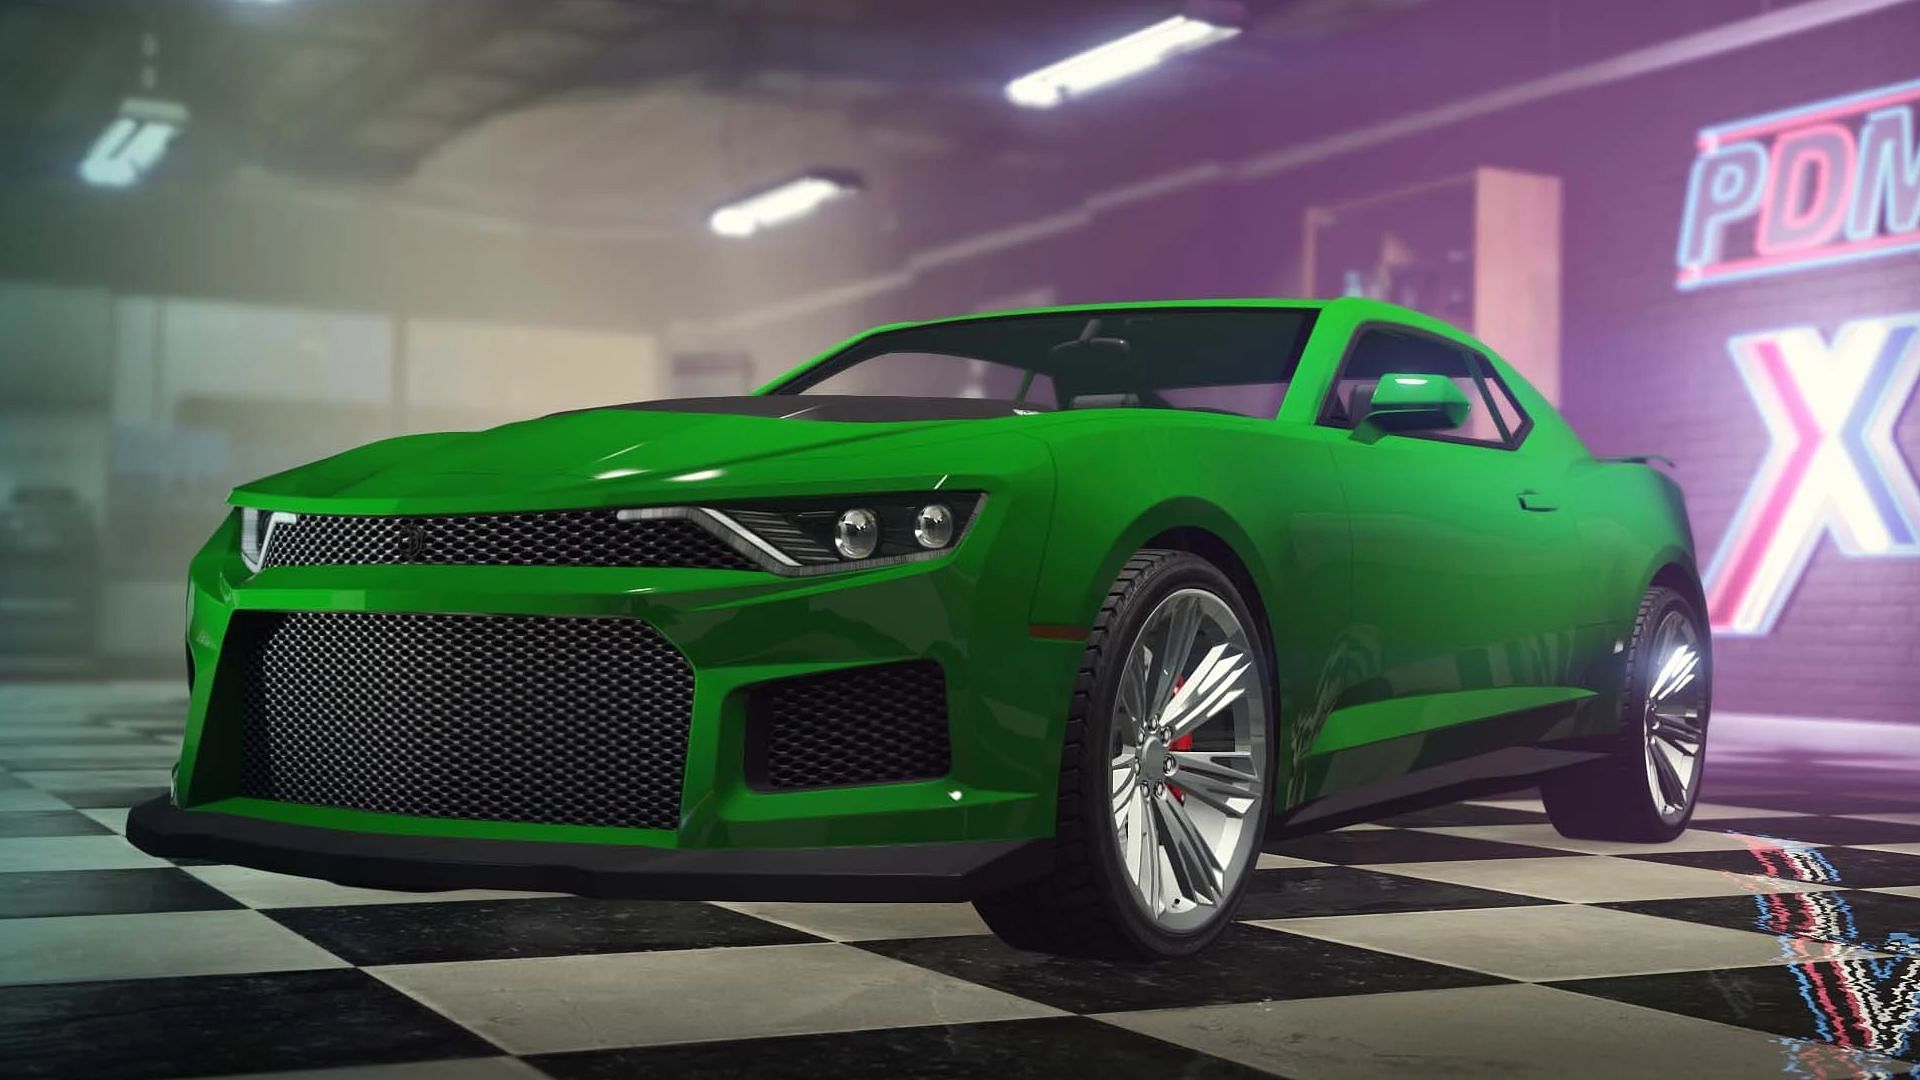 The Vigero ZX is one of the fastest new cars introduced in GTA Online